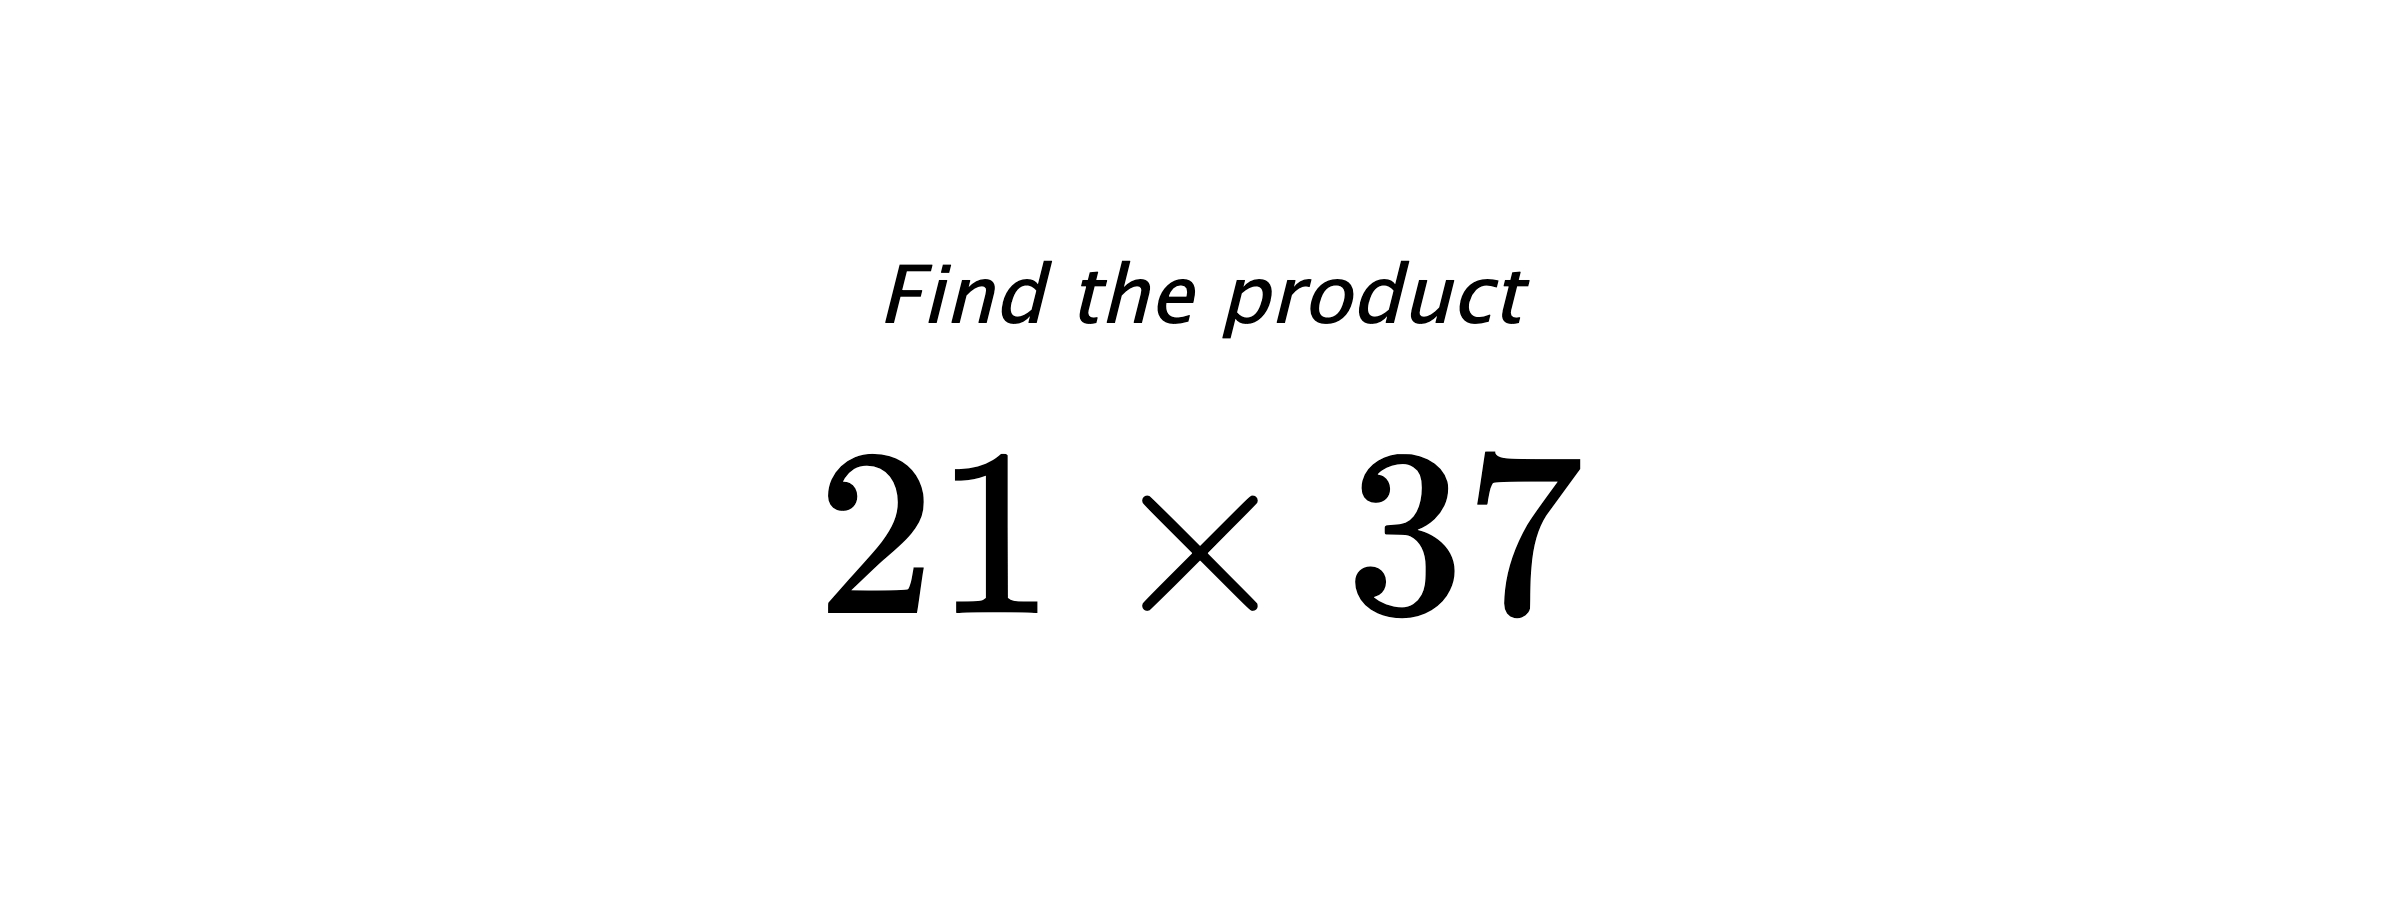 Find the product $ 21 \times 37 $